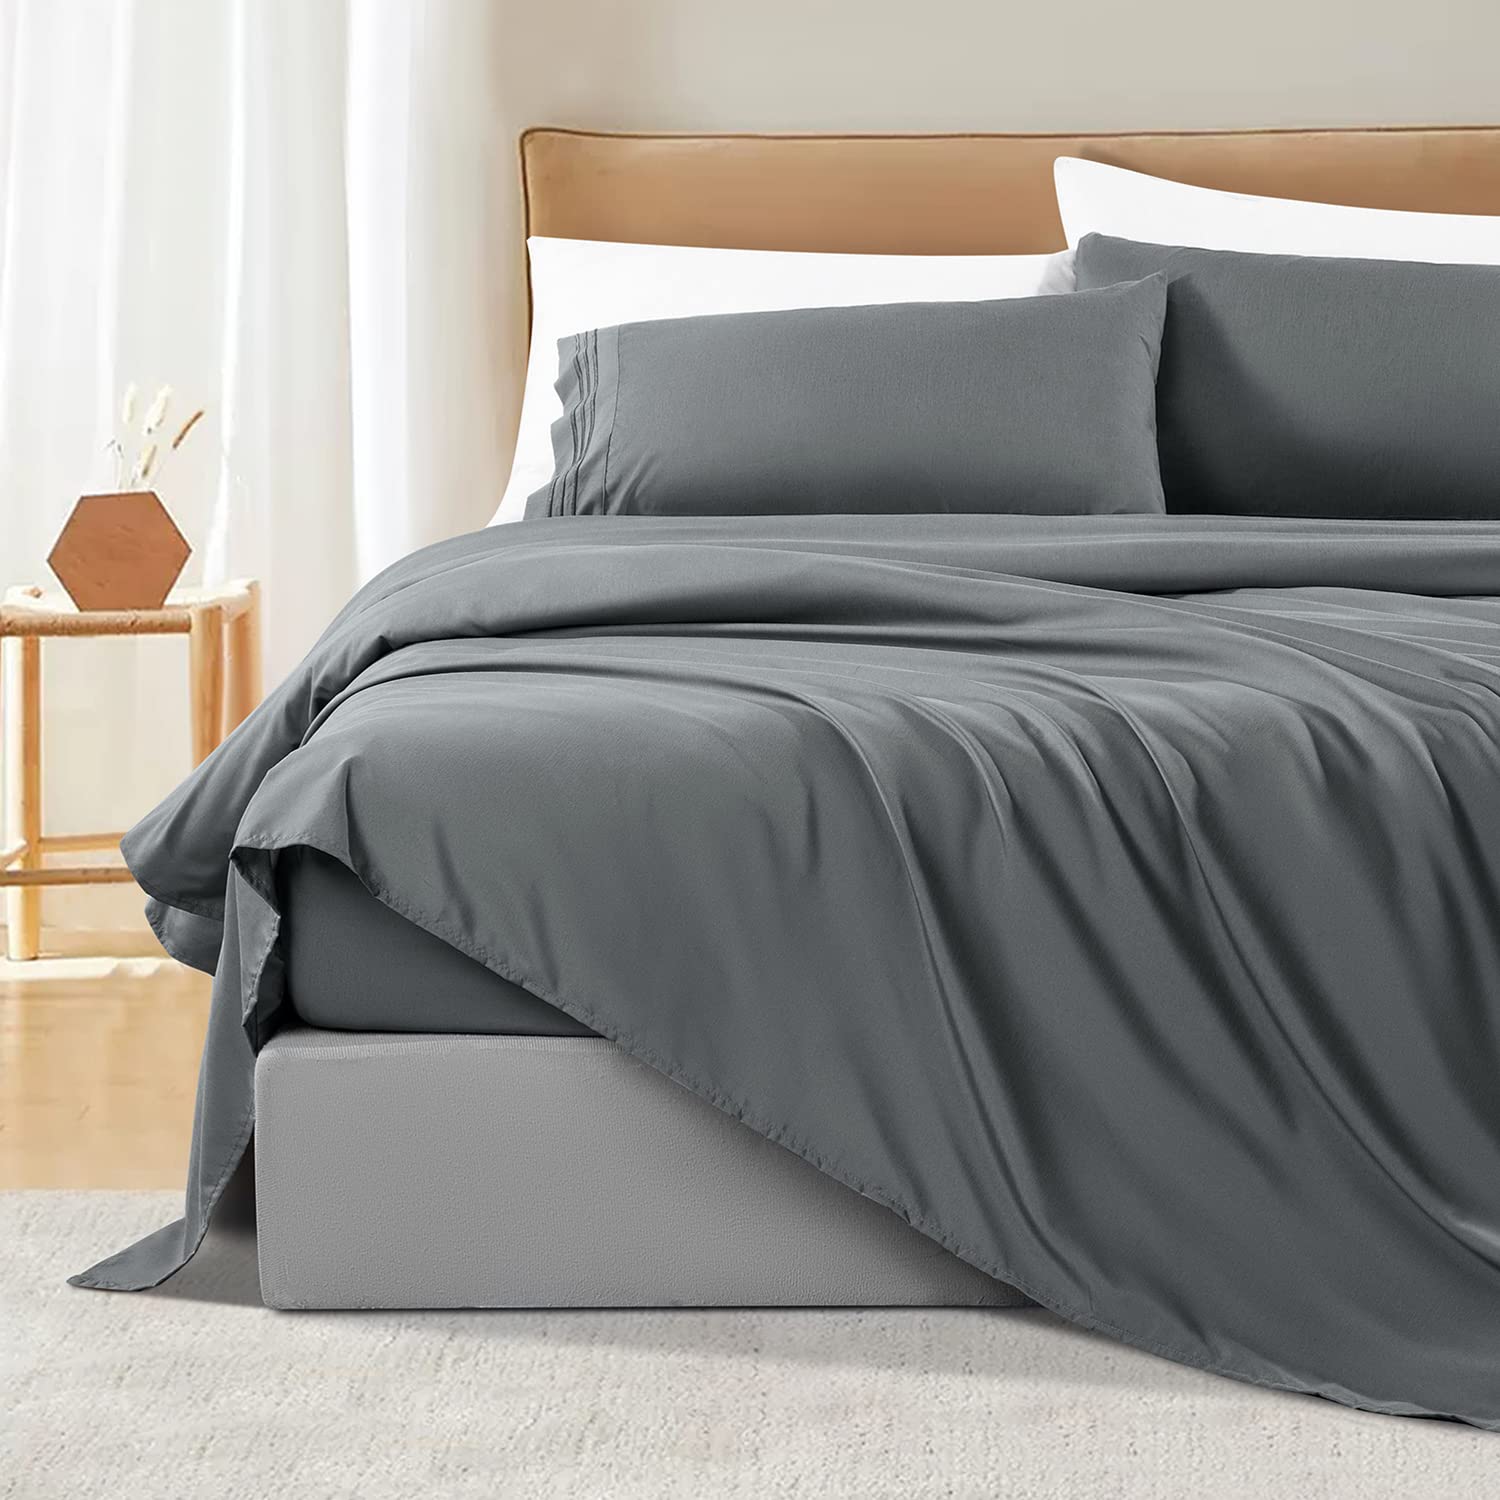 Book Cover Shilucheng King Size Bed Sheets Set Microfiber Polyester 1800 Thread Count Percale Super Soft and Comforterble 16 Inch Deep Pockets - 4 Piece (King, Dark Grey) Dark Grey King